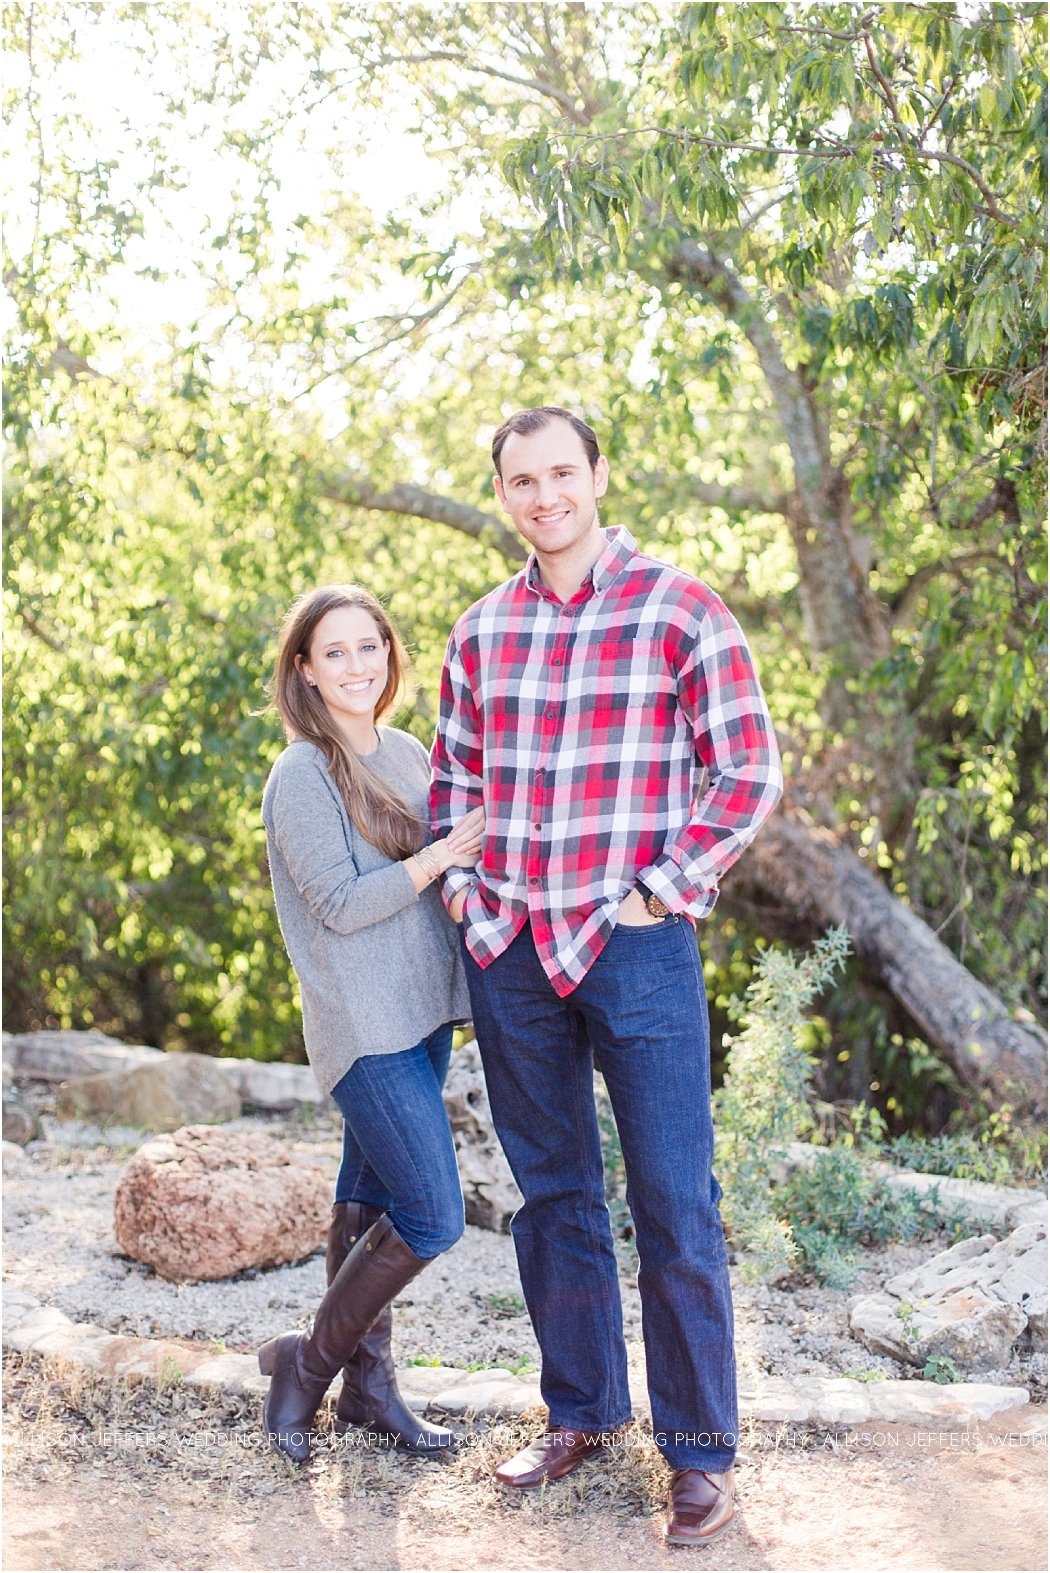 a-fall-engagement-session-in-fredericksburg-texas-by-allison-jeffers-wedding-photography_0001